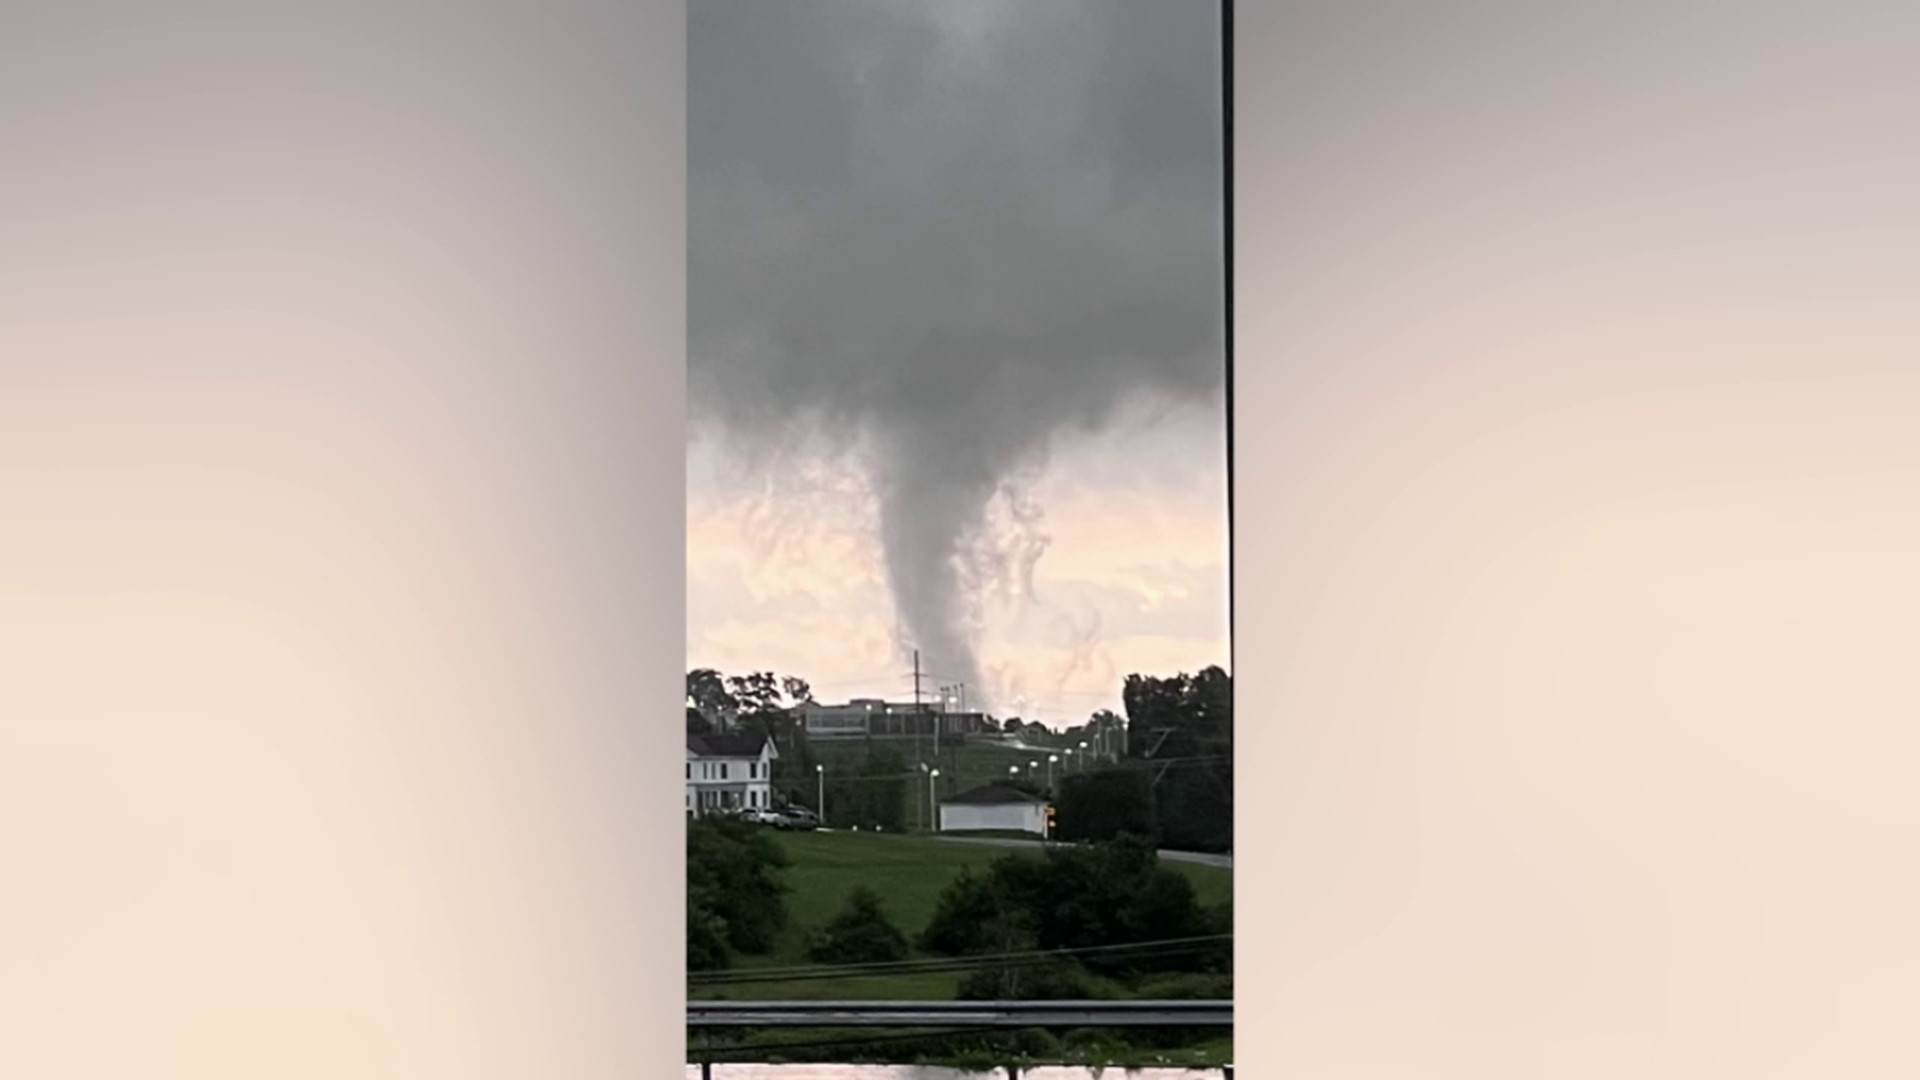 Newswatch 16's Chelsea Strub takes a look at some viewer photos captured during the severe weather on Monday.